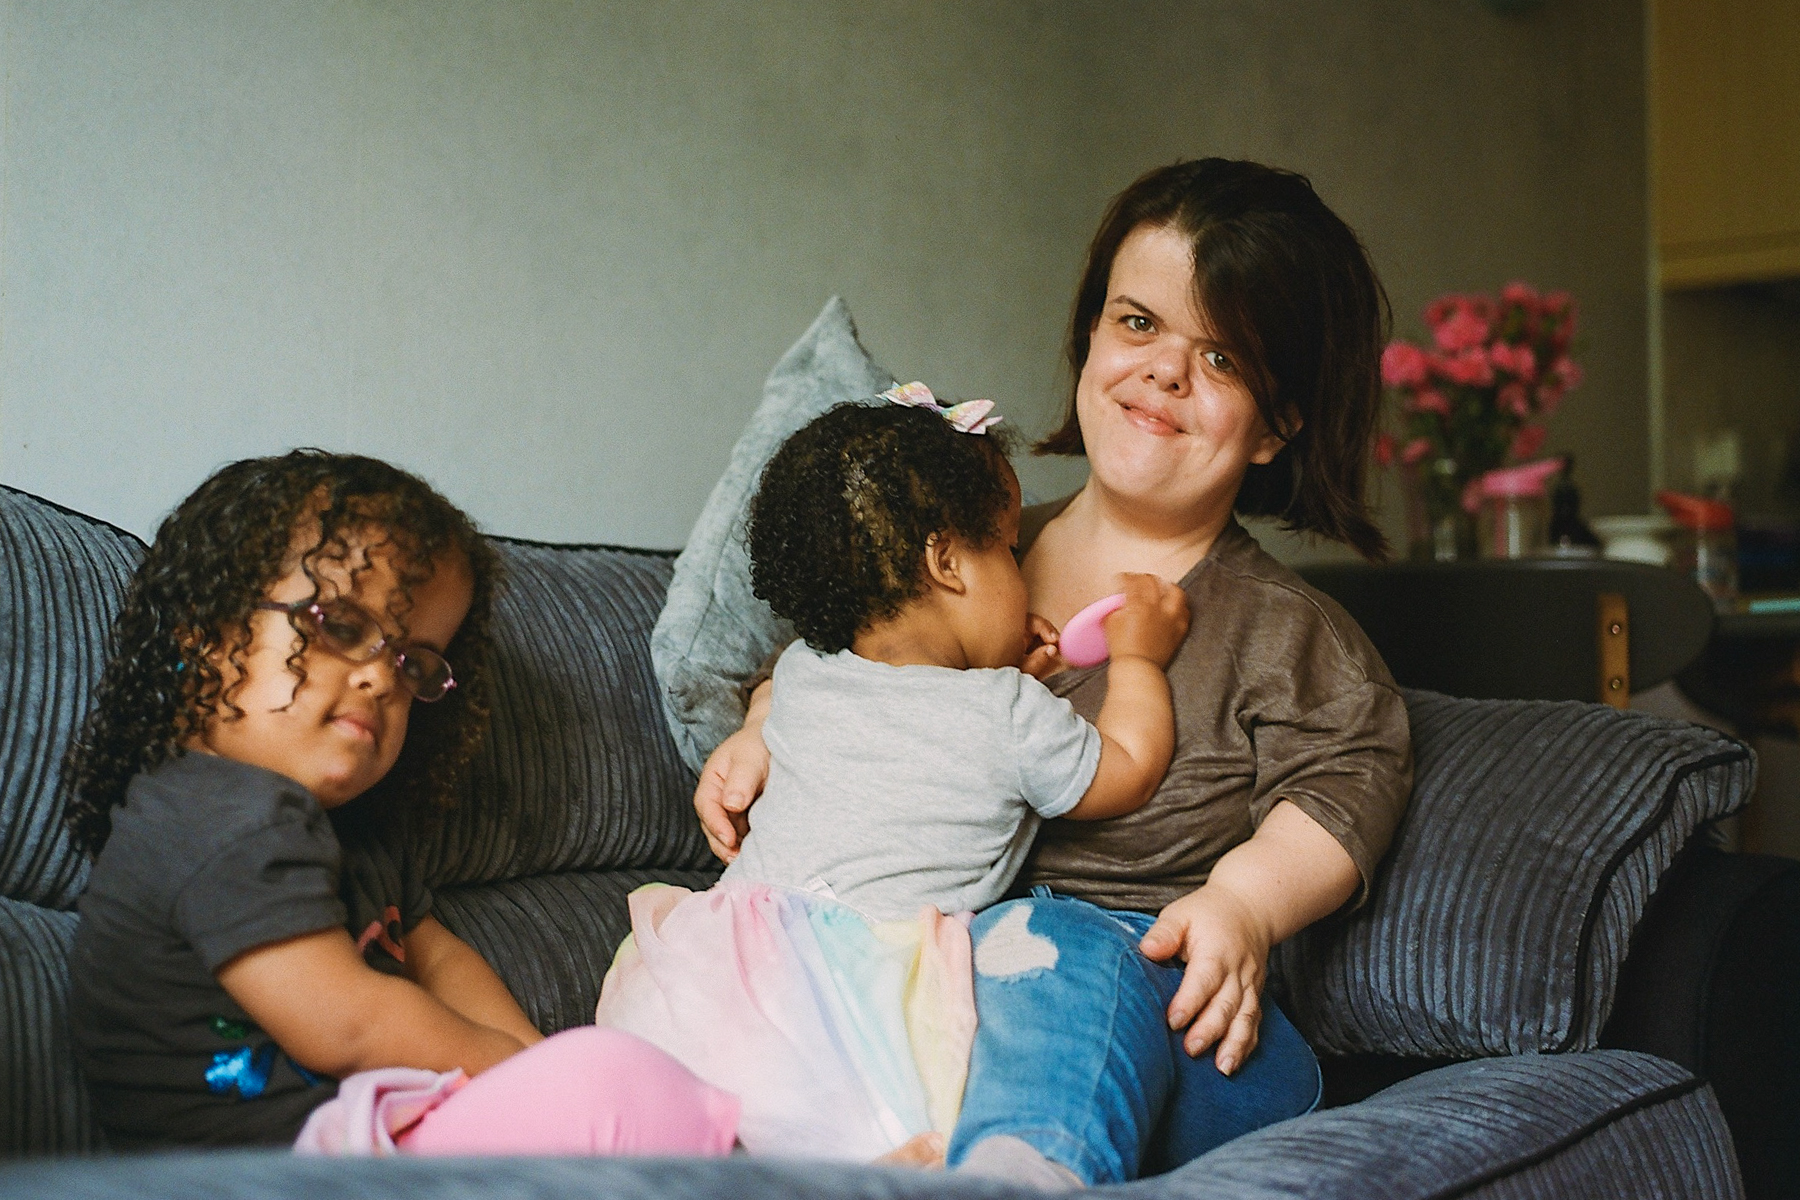 A photo of mum Cathy sitting on her sofa at home with her youngest child in her lap and her eldest sitting next to her looking at the camera